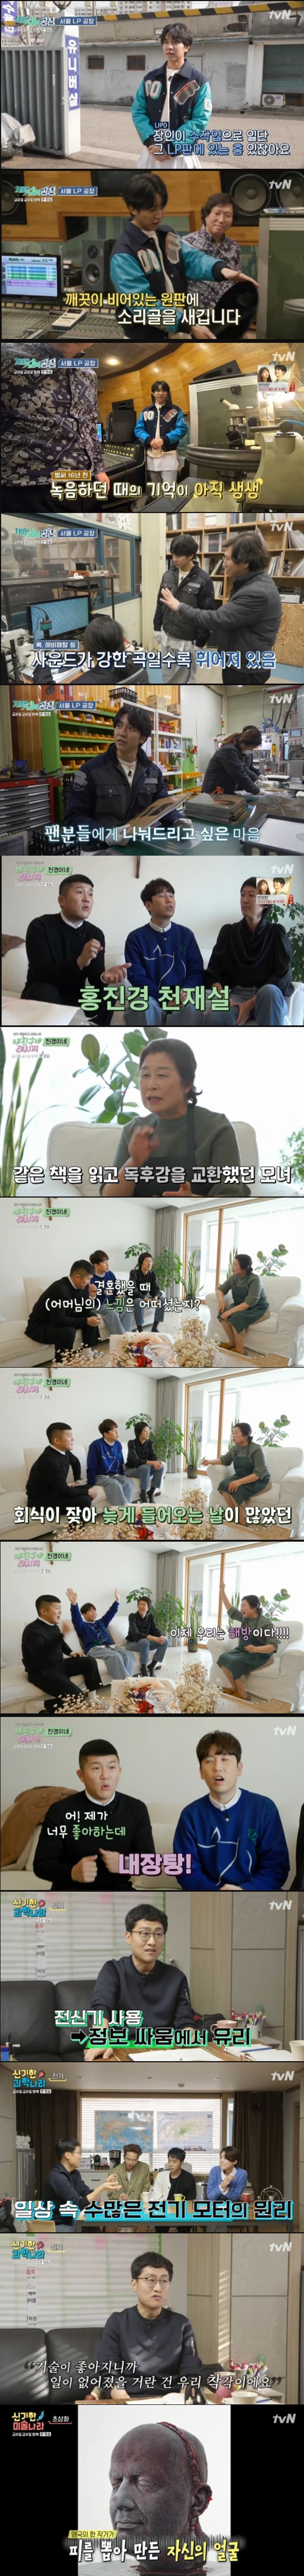 Friday night ended with the last story of the 10th episode.On TVN Friday Night broadcasted on March 20, Lee Seung-gi, Lee Seo-jin, Jin-kyeong Hong, Eun Ji Won, Song Min Ho and Jang Do Yeon had fun with different topics such as labor, cooking, science, art and travel.Lee Seung-gi experienced the LP factory at the Factory of Experience Life corner, and Lee Seung-gi said, Today, this factory is poisonous.I wanted to come in the life of a singer. After that, Lee Seung-gi started to produce an LP version with his song.Lee Seung-gi, who met with the LP production master, said, I made a lot of albums, but I first knew that there was only one LP production company in Seoul and only one person to make it.Lee Seung-gi then carved the sound bone into the LP disk. One sound bone is very fine, about 20/1,000 mm, the master explained.Lee Seung-gi, a 17-year-old singer, said, It is a song that goes well with LPG because it is my woman. It reminds me of the time when I recorded it. Lee Seung-gi, who compared the LP version with digital sound sources, said, Vocal is more emphasized and sounds more live.When the master said, I heard it right, Lee Seung-gi smiled, saying, I like ears, not a last-minute.Lee Seung-gi later made the 100-page limited edition LP edition.When I asked who the PD was going to present to, Lee Seung-gi said, I am sorry, but I can not give it to the bishop.Lee Seung-gi was moved when she presented the original LP edition with Lee Seung-gis song at the LP factory.In very special and secret friend recipe, Jo Se-ho and Nam Chang-hee took charge of daily corner and found Jin-kyeong Hong Mother house.As soon as he saw Jo Se-ho, Jin-kyeong Hong revealed that he was sending naked pictures of his upper body because he has lost weight these days.Jo Se-ho laughed, saying, I sent it only to my sister and Changhee.Jo Se-ho and Nam Chang-hee met Jin-kyeong Hong Mother and listened to Jin-kyeong Hongs childhood story.When Jo Se-ho asked, Is it true that there is a story about Jin-kyeong Hong genius? Mother said, Jin Kyeong liked to read books.I read the book that Jin Kyeong read first, talked to each other, and wrote a book report together. I had a book report on the book report. When Jo Se-ho asked her daughter Jin-kyeong Hong how she was married, she said, Honestly, we wanted to raise Jin Kyeong and marry him.Im not sure how hard it is to live on the station, but since he was filming and always coming in late, Husband and I alternated and stood in a non-stop manner.Jin-kyeong Hong said, Once I came to dinner at 3 am, one person was awake.Mother of Jin-kyeong Hong said, I am talking for the first time, but Jin Kyeong came home after the wedding and called Hello at the same time as Husband.I liked it because it was liberation, he said, and laughed.Mother has unveiled a visceral recipe that Jin-kyeong Hong has always done when tired or struggling: the visceral is cleaned with flour and then rinsed with salt.Then bring the ginger to a boil, and the guts and giblets are mixed with sliced radish, chopped garlic, spices, sesame oil, oil and pepper, and then put them in boiled broth.In the novel science country, the characteristics of electricity were explored. Professor Kim Sang-wook explained the principle of electricity, such as charge and phone, and experimented that electricity occurs through this.Until then, if you were riding a horse and informed of information, you would have invented a telegraph and delivered information at a rapid pace, said Professor Kim Sang-wook, who made a big fortune by selling telegraphs by monopolizing information.He said that if there is a magnet and a current, he can make a motor. He said that he can use elevators and electric cars.I think the invention of the washing machine has reduced the working hours of women, but the working hours of men have decreased.Its a mistake that things are getting smaller because science and technology have developed, he said.Choi Seung-hye